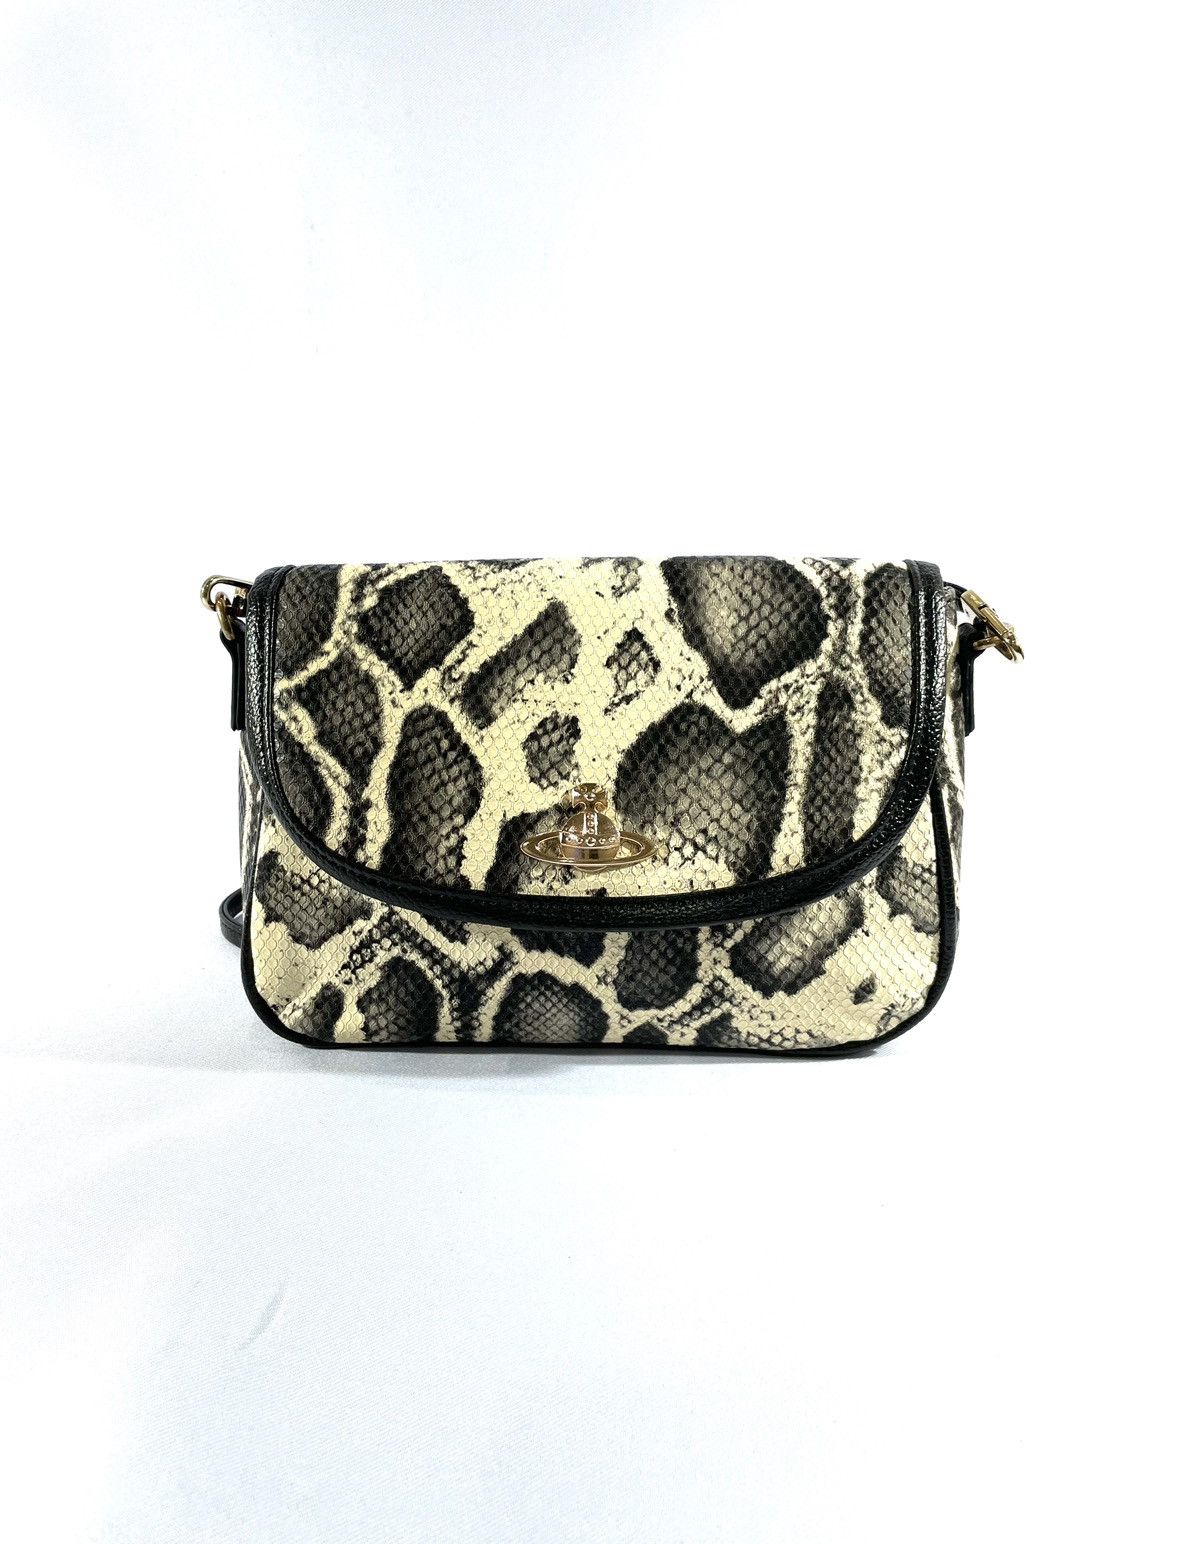 Vivienne Westwood Snake Skin Orb Crossbody Bag Size ONE SIZE - 2 Preview